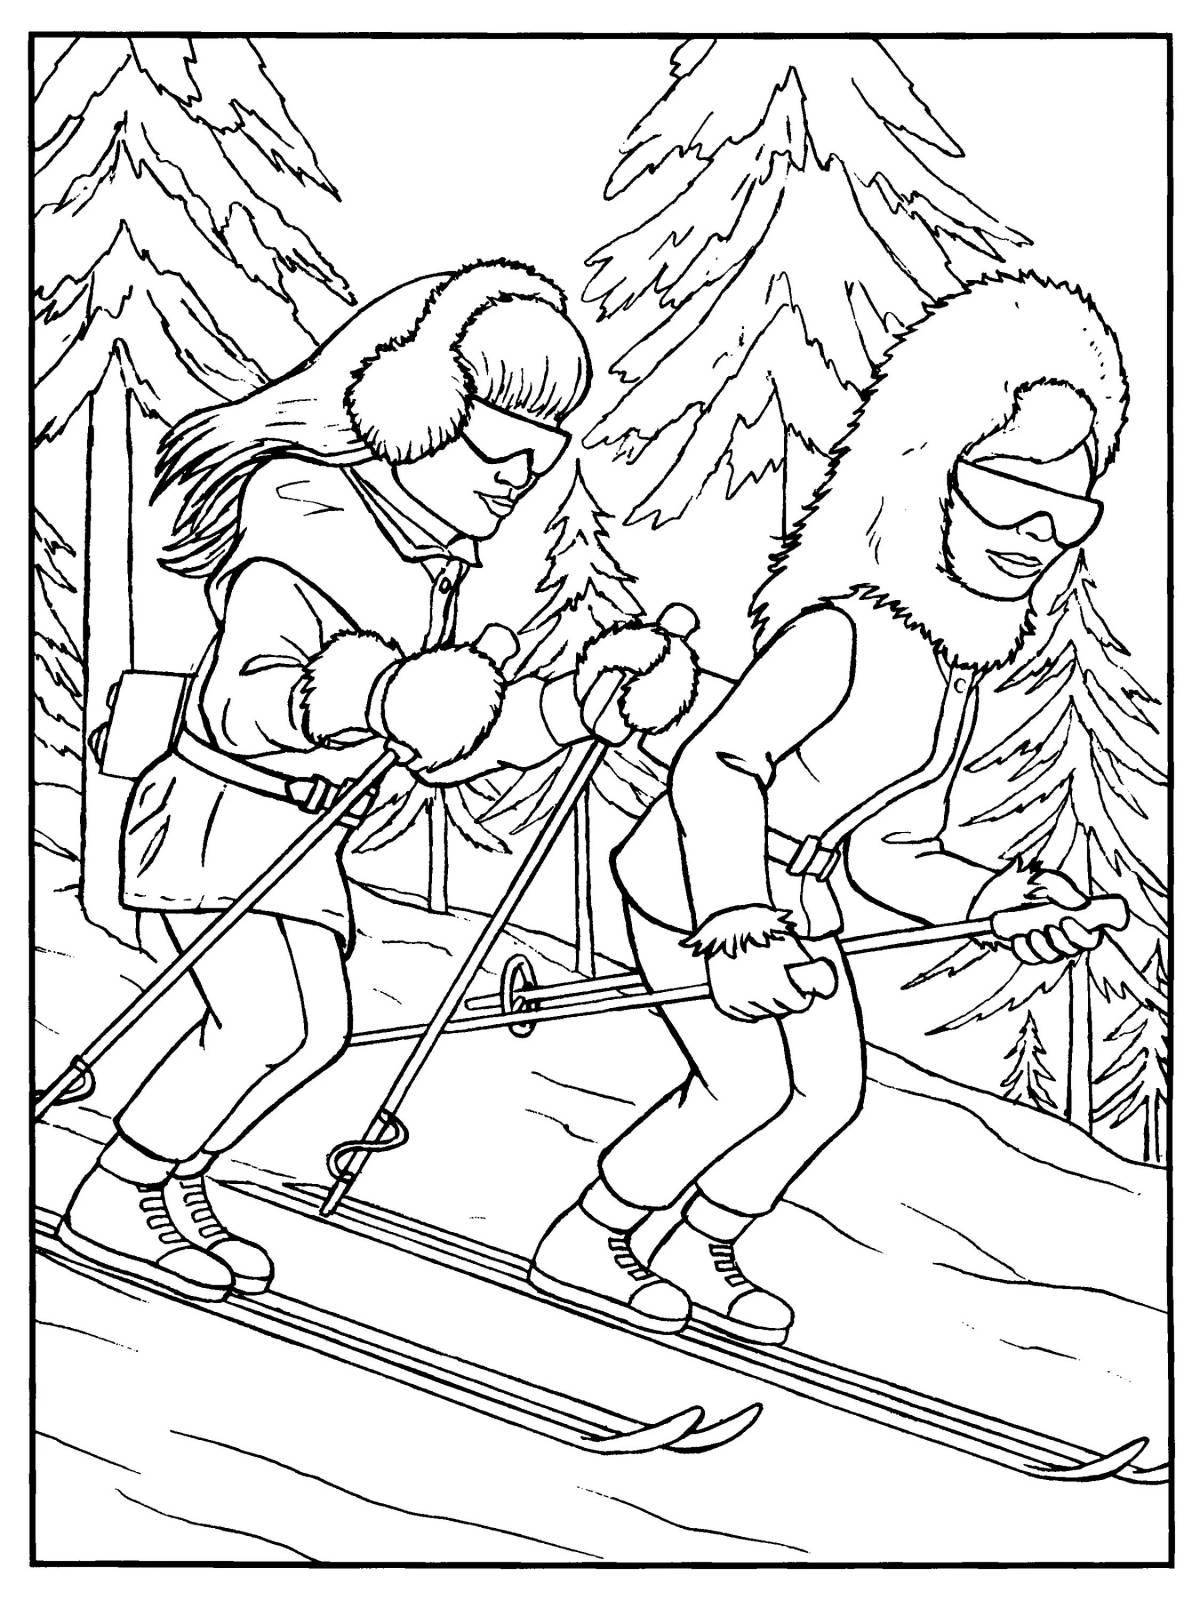 Dazzling family skiing coloring book